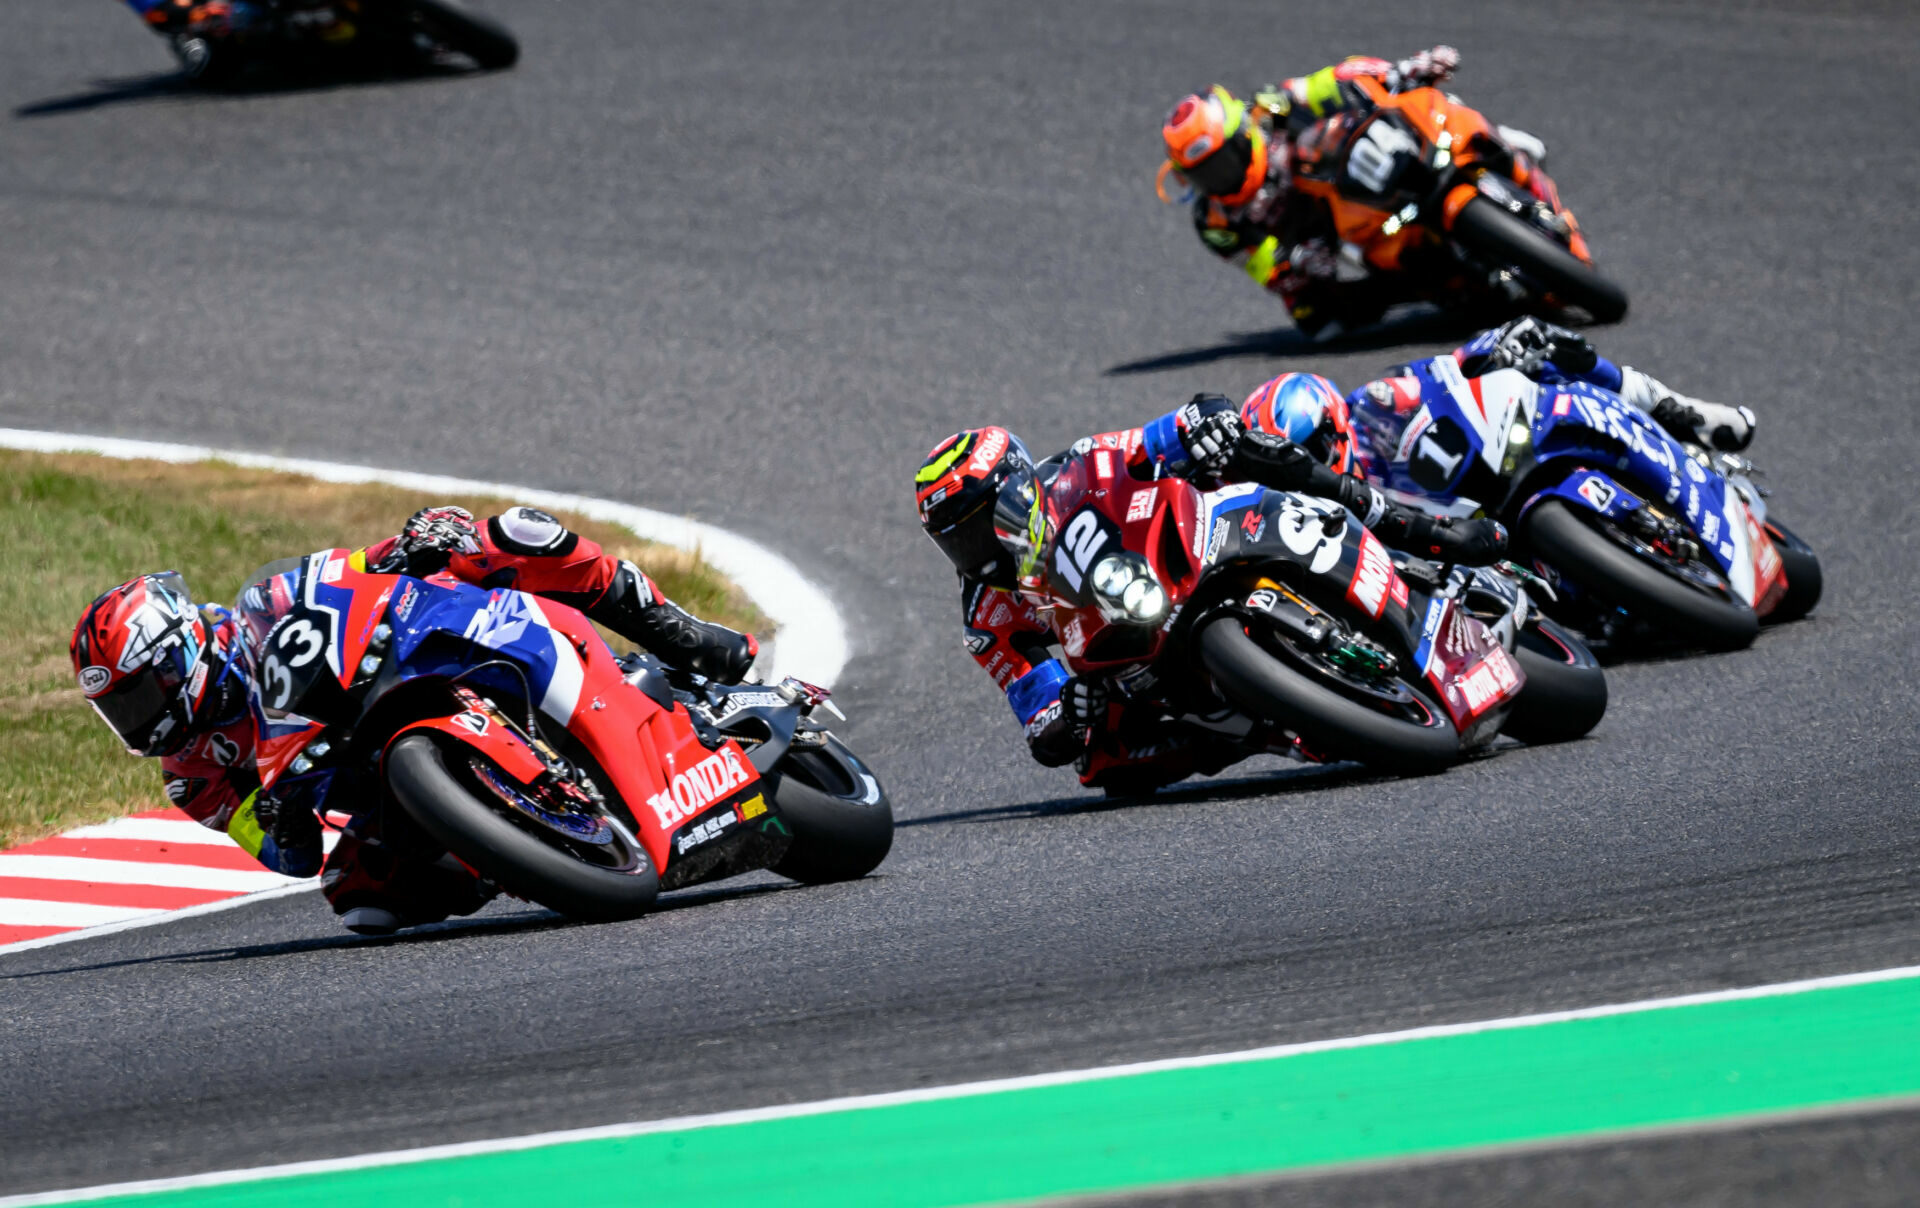 TOHO Racing (104), seen here trailing Team HRC with Japan Post (33), Yoshimura SERT Motul (12), and F.C.C. TSR Honda France (1) in the lead group early in the Suzuka 8-Hours race, has been disqualified from second place. Photo by Kohei Hirota.